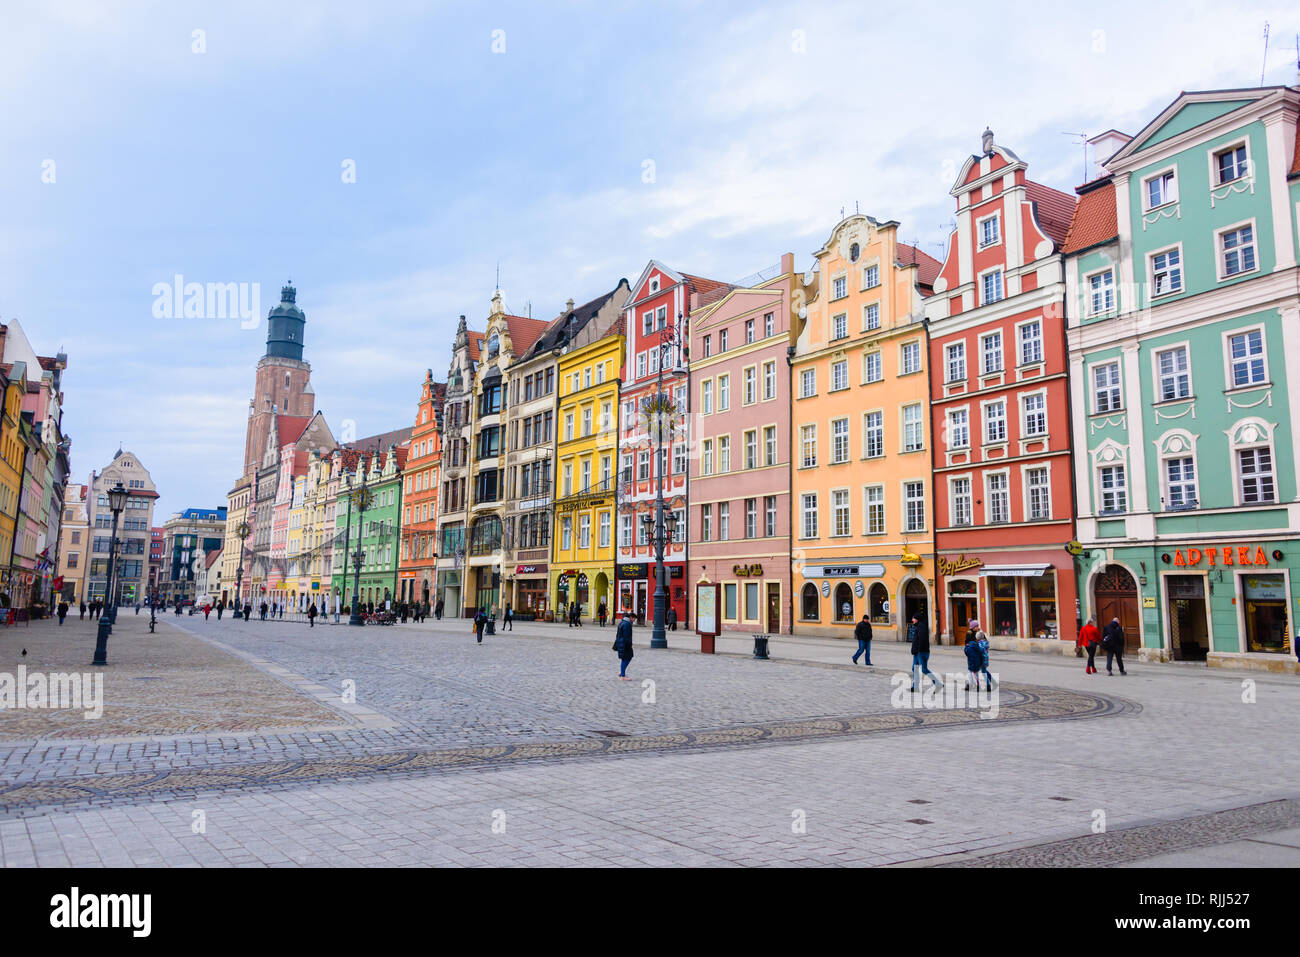 Colourful Buildings Within The Town City Square Rynek Wroclaw Wroclaw Wroklaw Poland Stock Photo Alamy